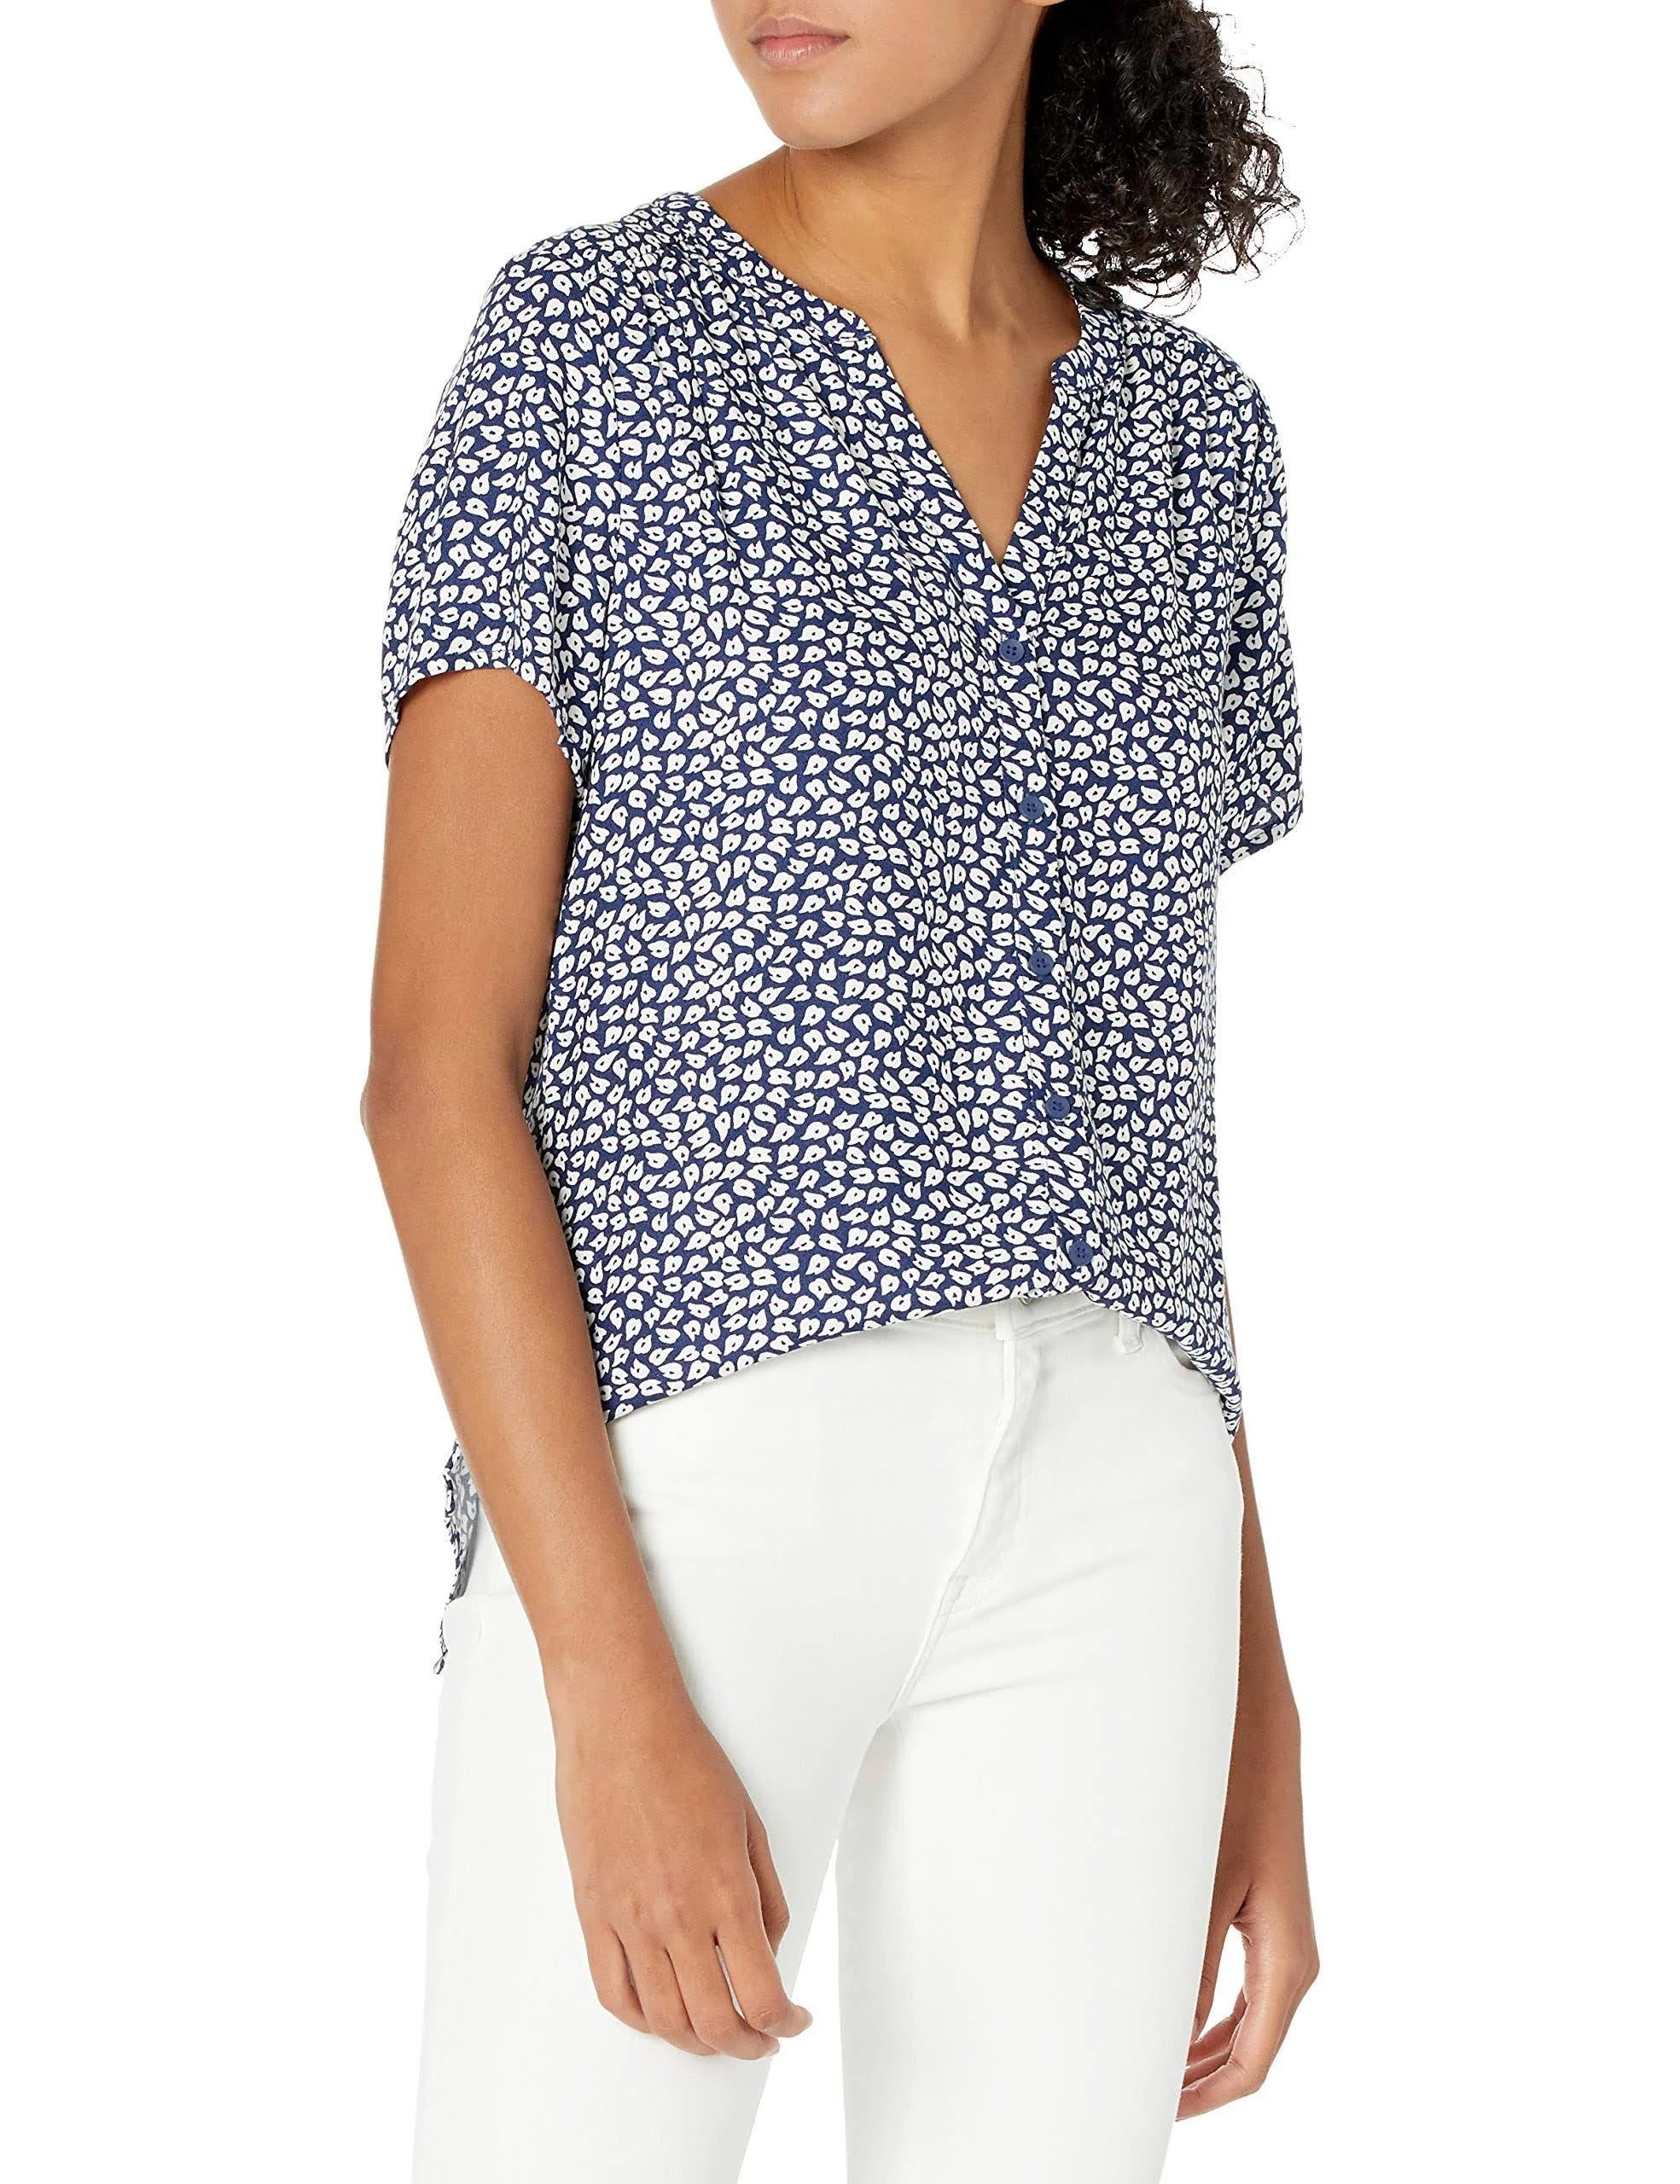 Relaxed Fit, Versatile Work Top Blouse from Amazon Essentials | Image